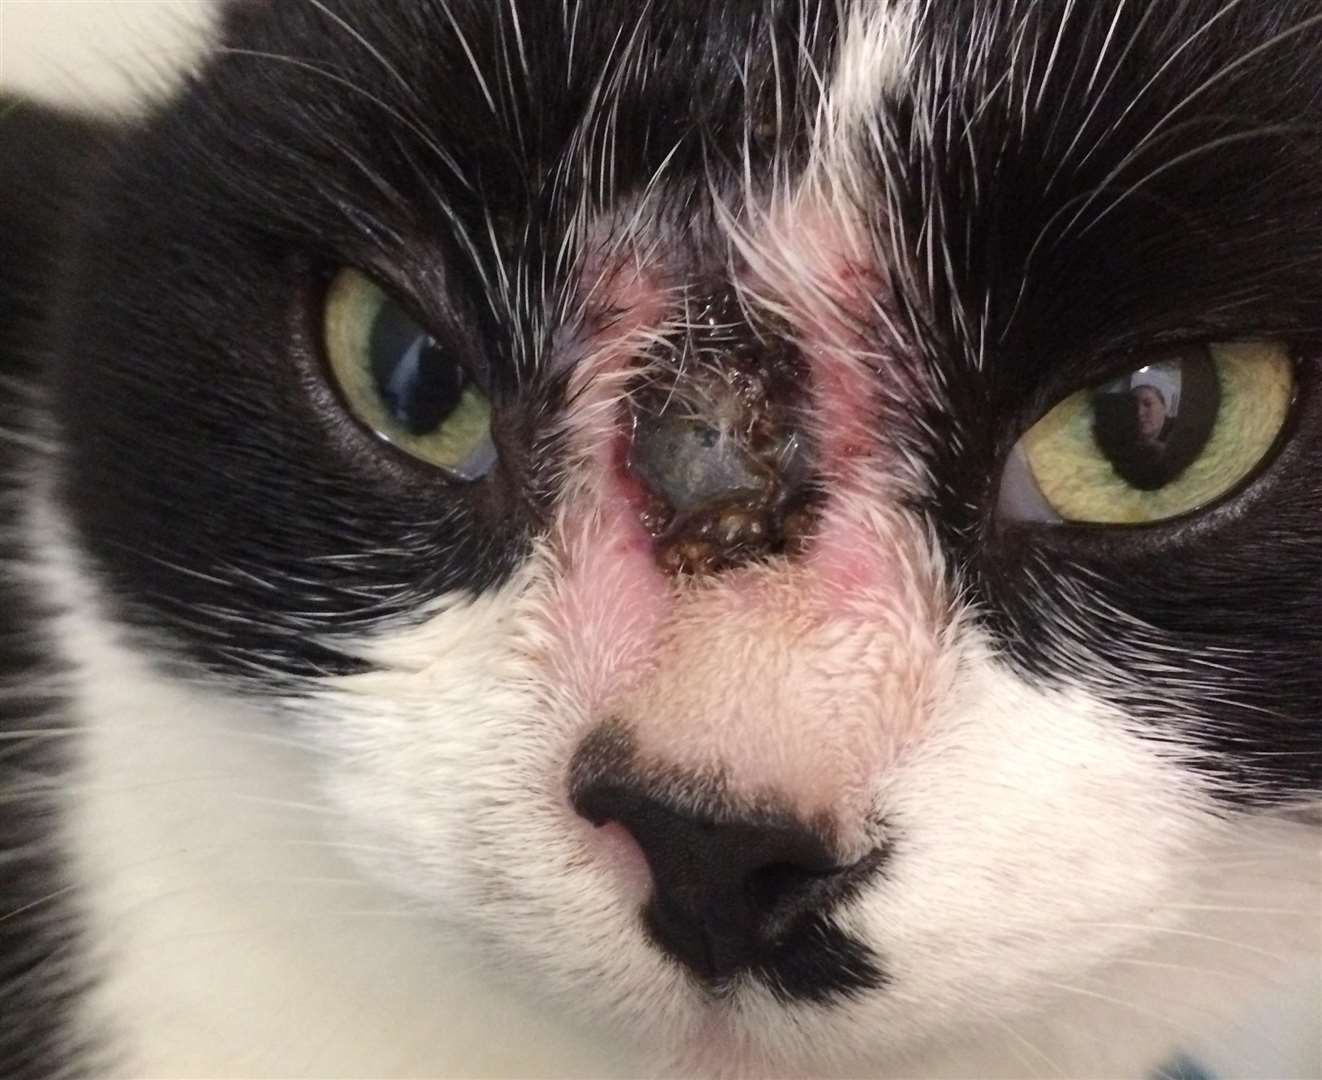 The cat was shot in the face with a ball bearing. Picture: RSPCA (5959966)